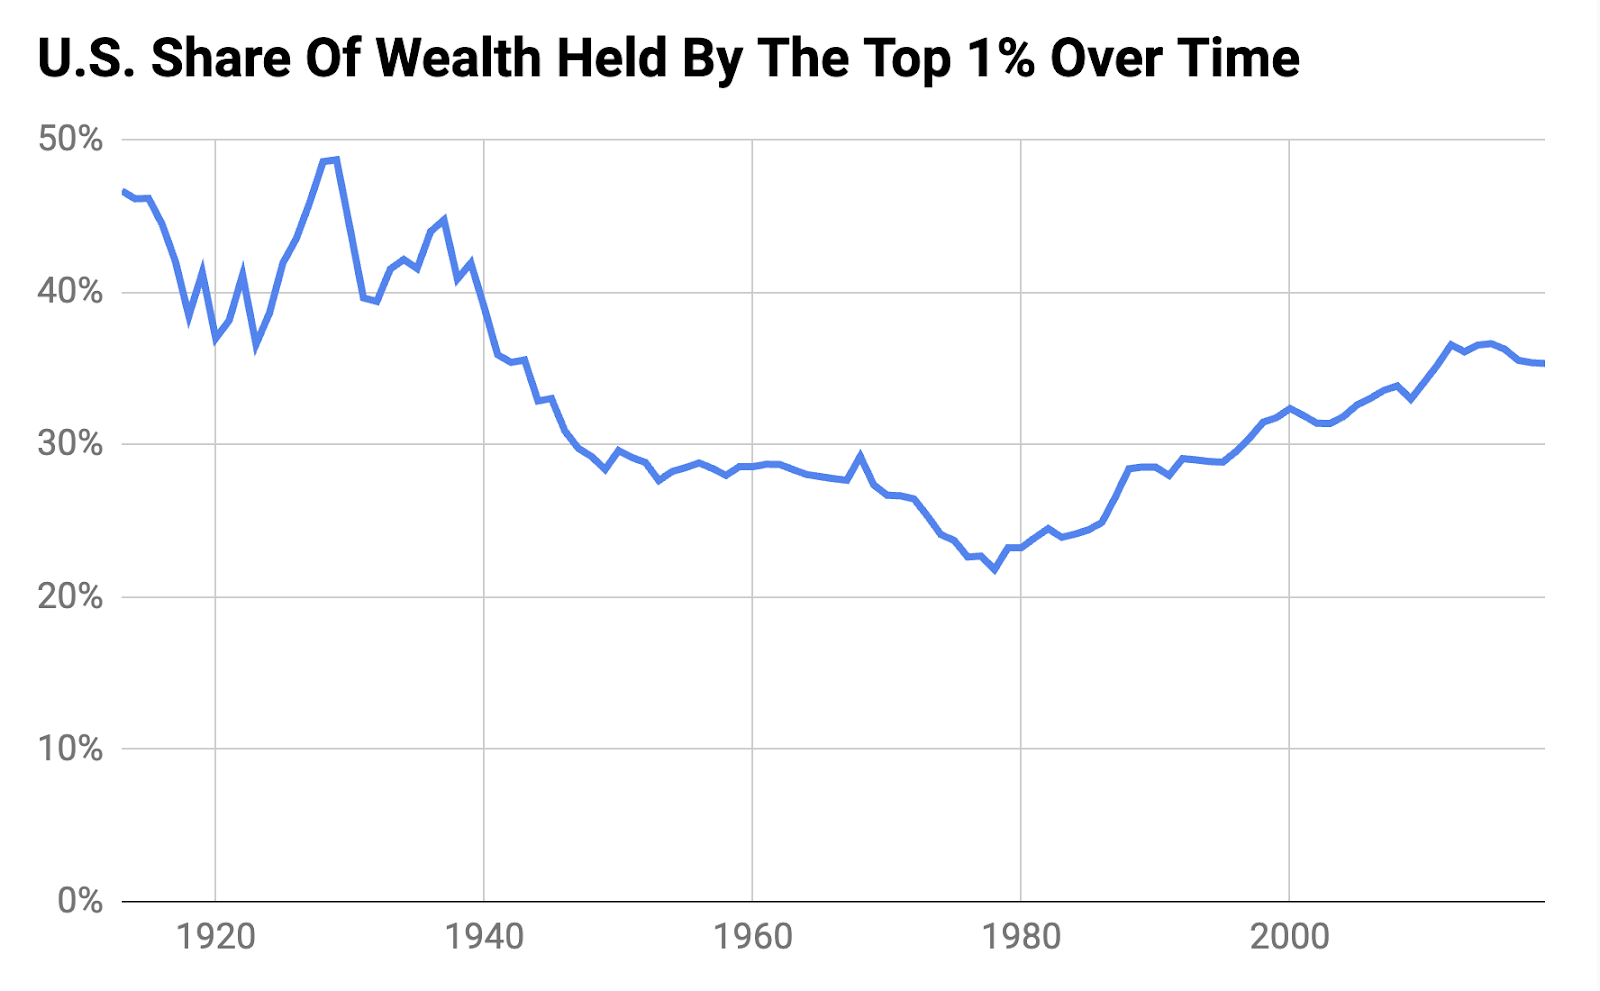 Top 1-Percent's Share Of Wealth Over Time